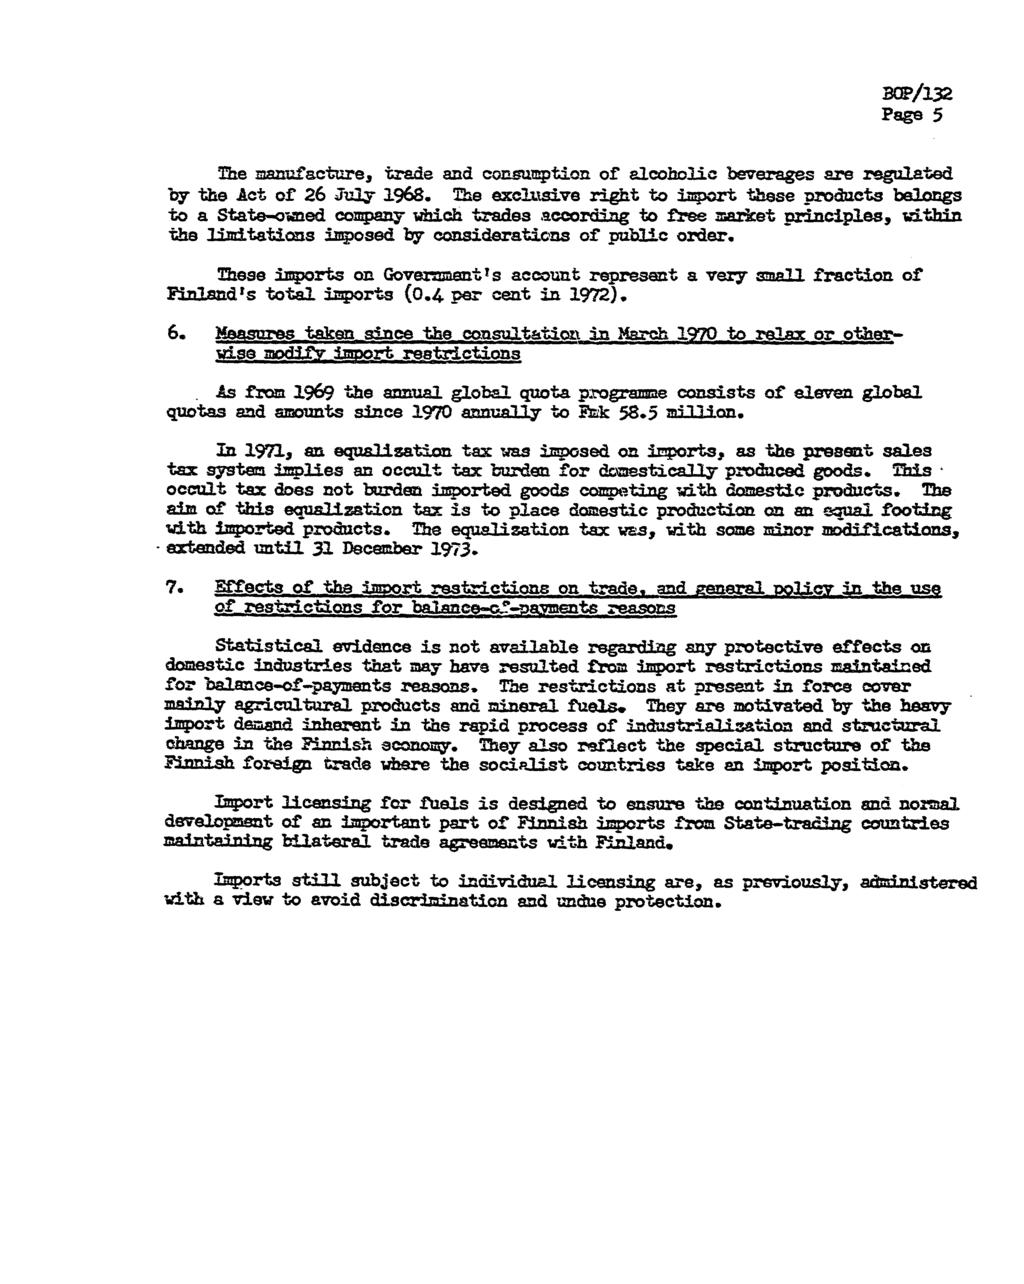 Page 5 The manufacture, trade and consumption of alcoholic beverages are regulated by the Act of 26 July 1968.